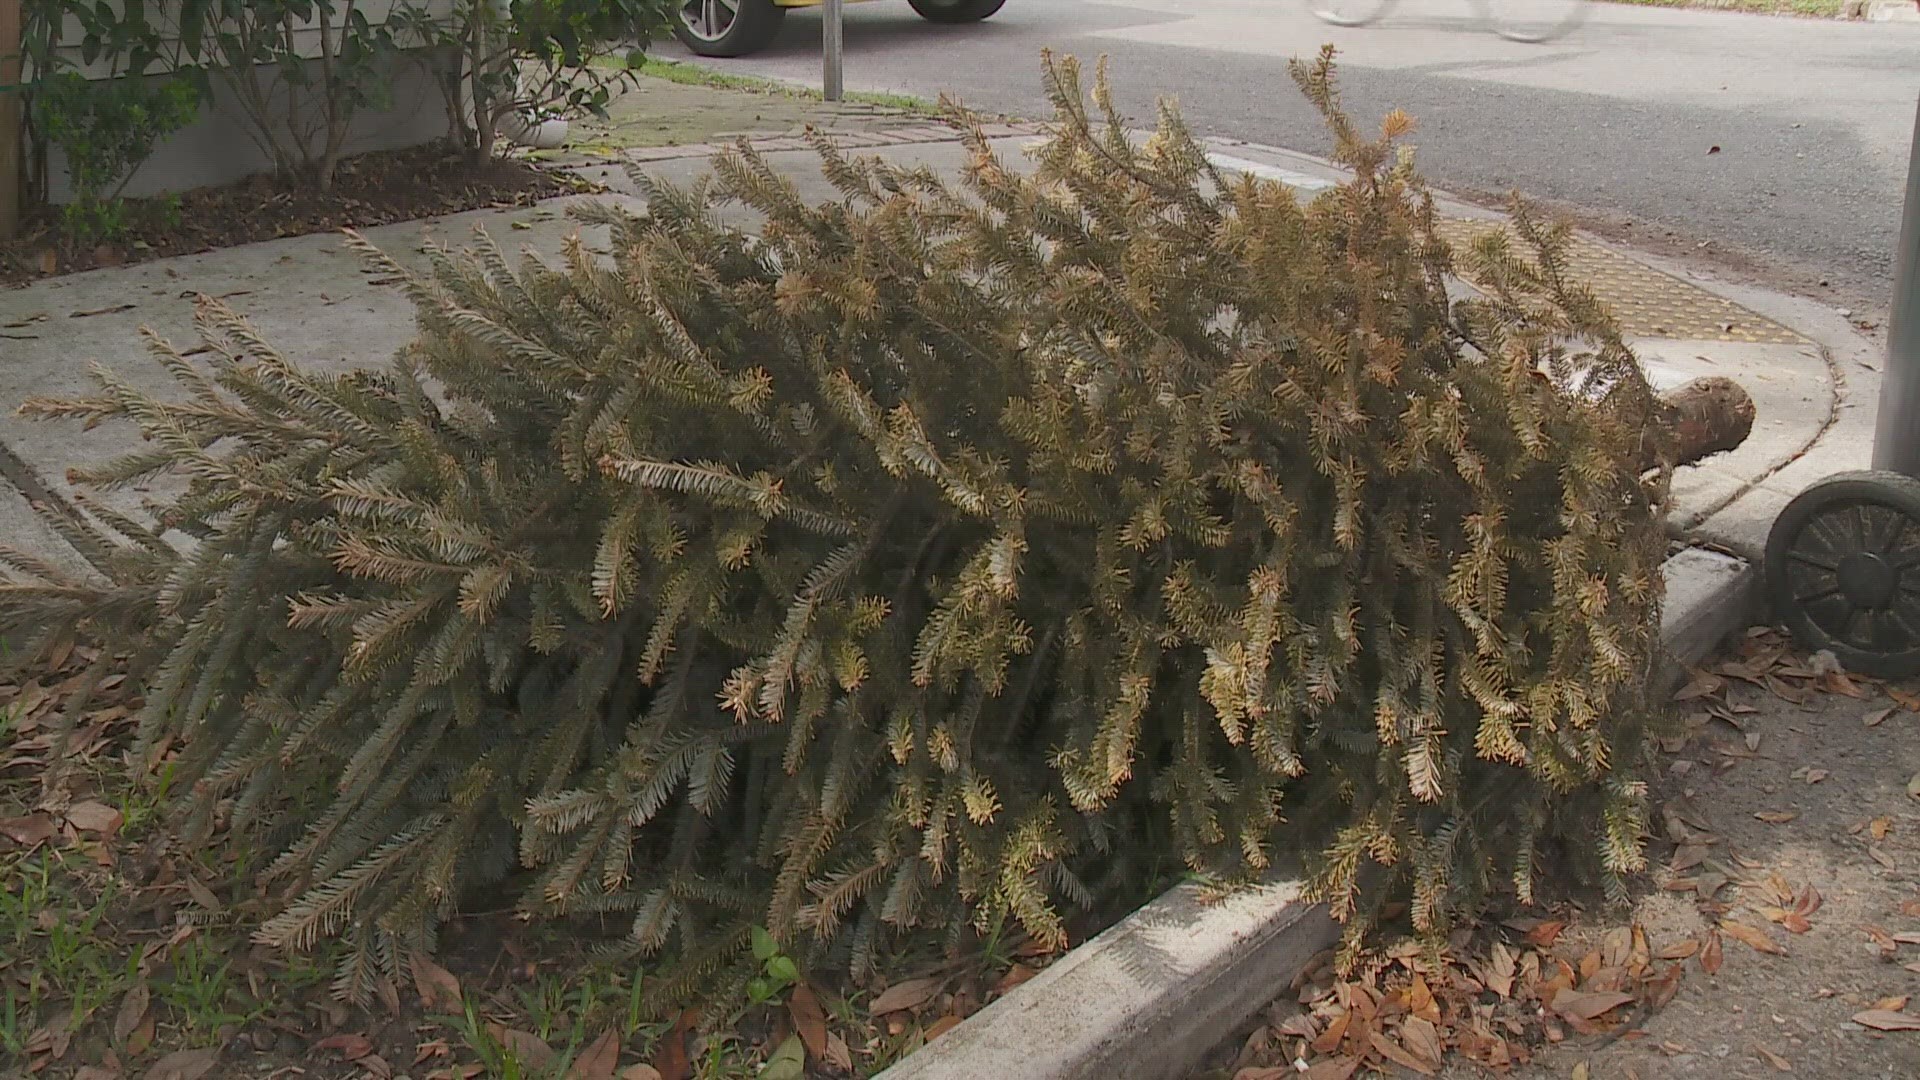 Only live Christmas trees with the decorations off of them qualify for use. Most parishes have days set aside to collect them.